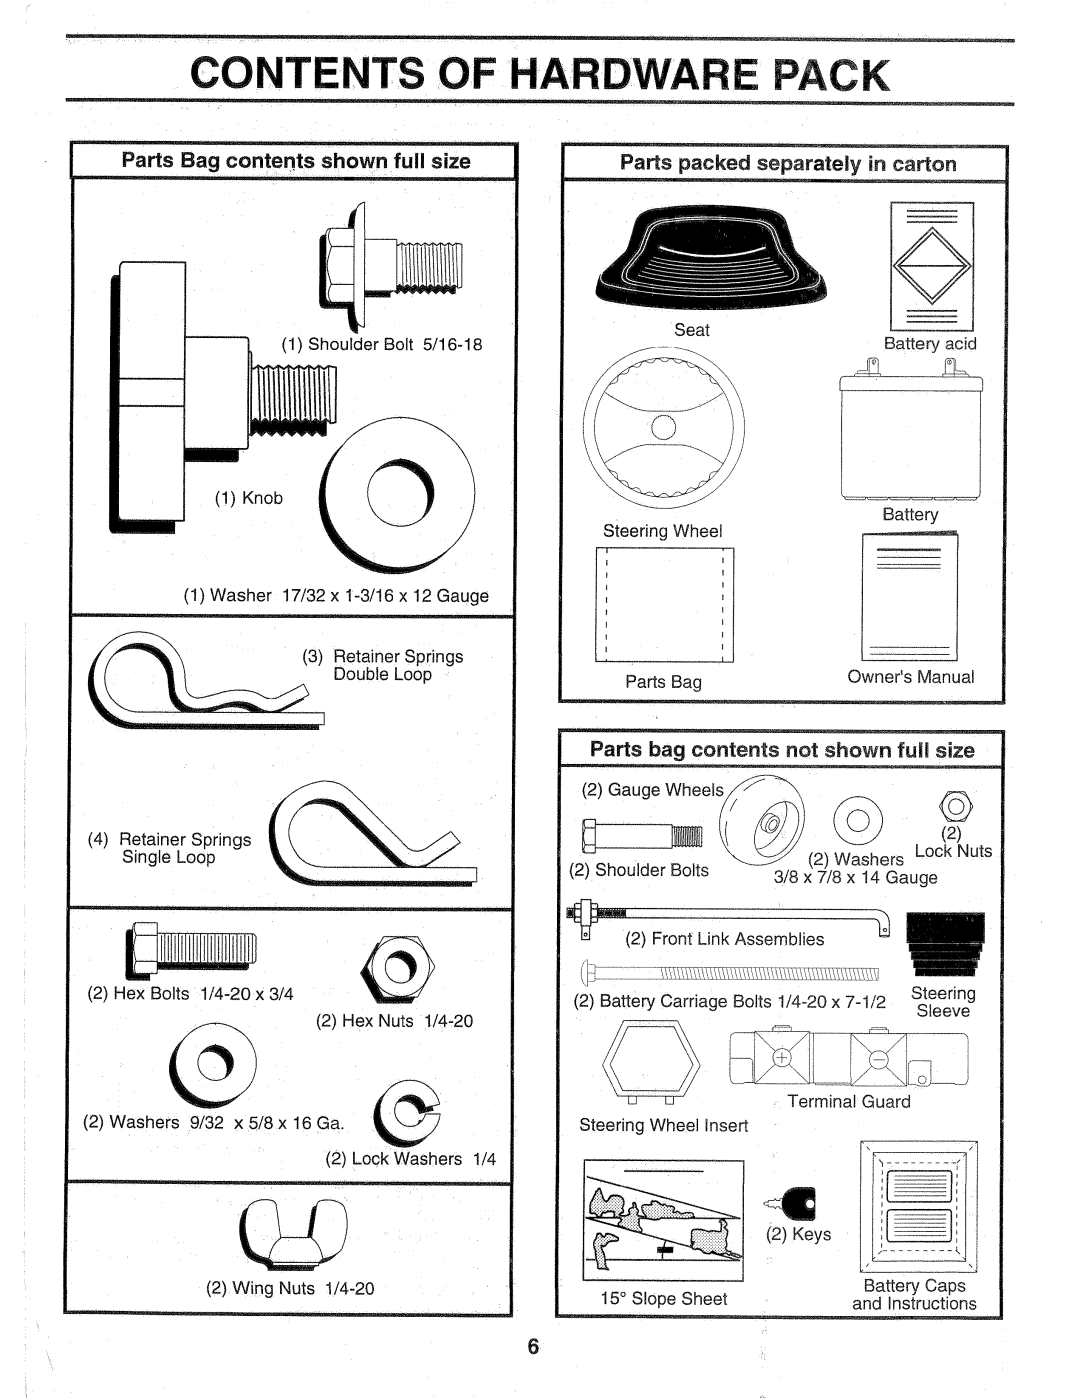 Sears 917.257720 owner manual Contents ,Of, E Pack, Parts Bag contents shown full size, packed separately in carton 